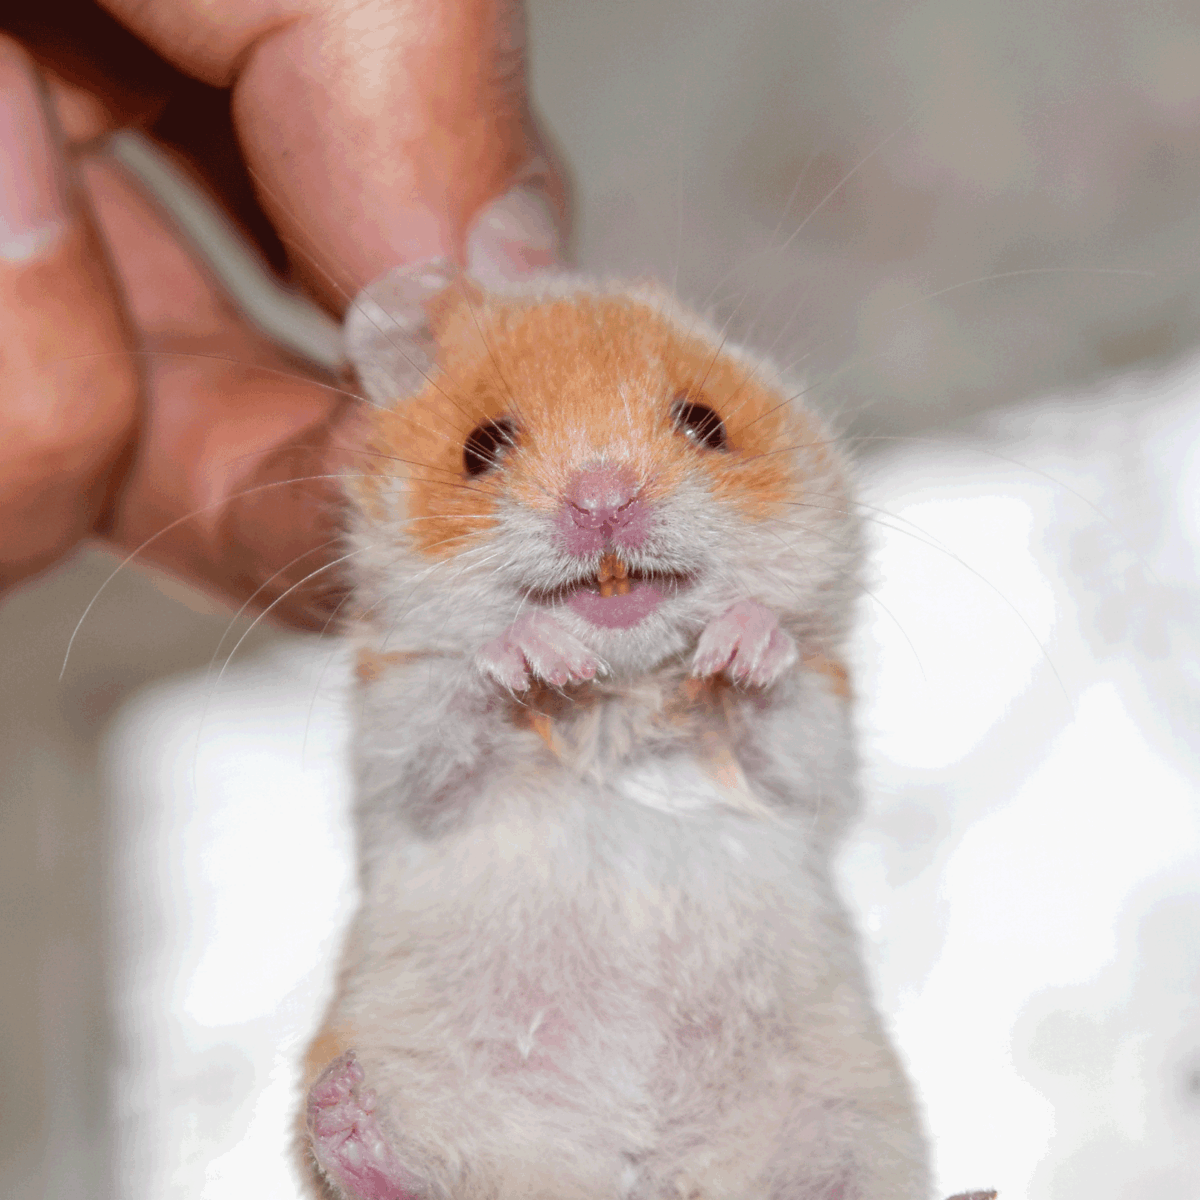 Hamster in hand. Hamster hold the scruff. Hamster held with fingers.